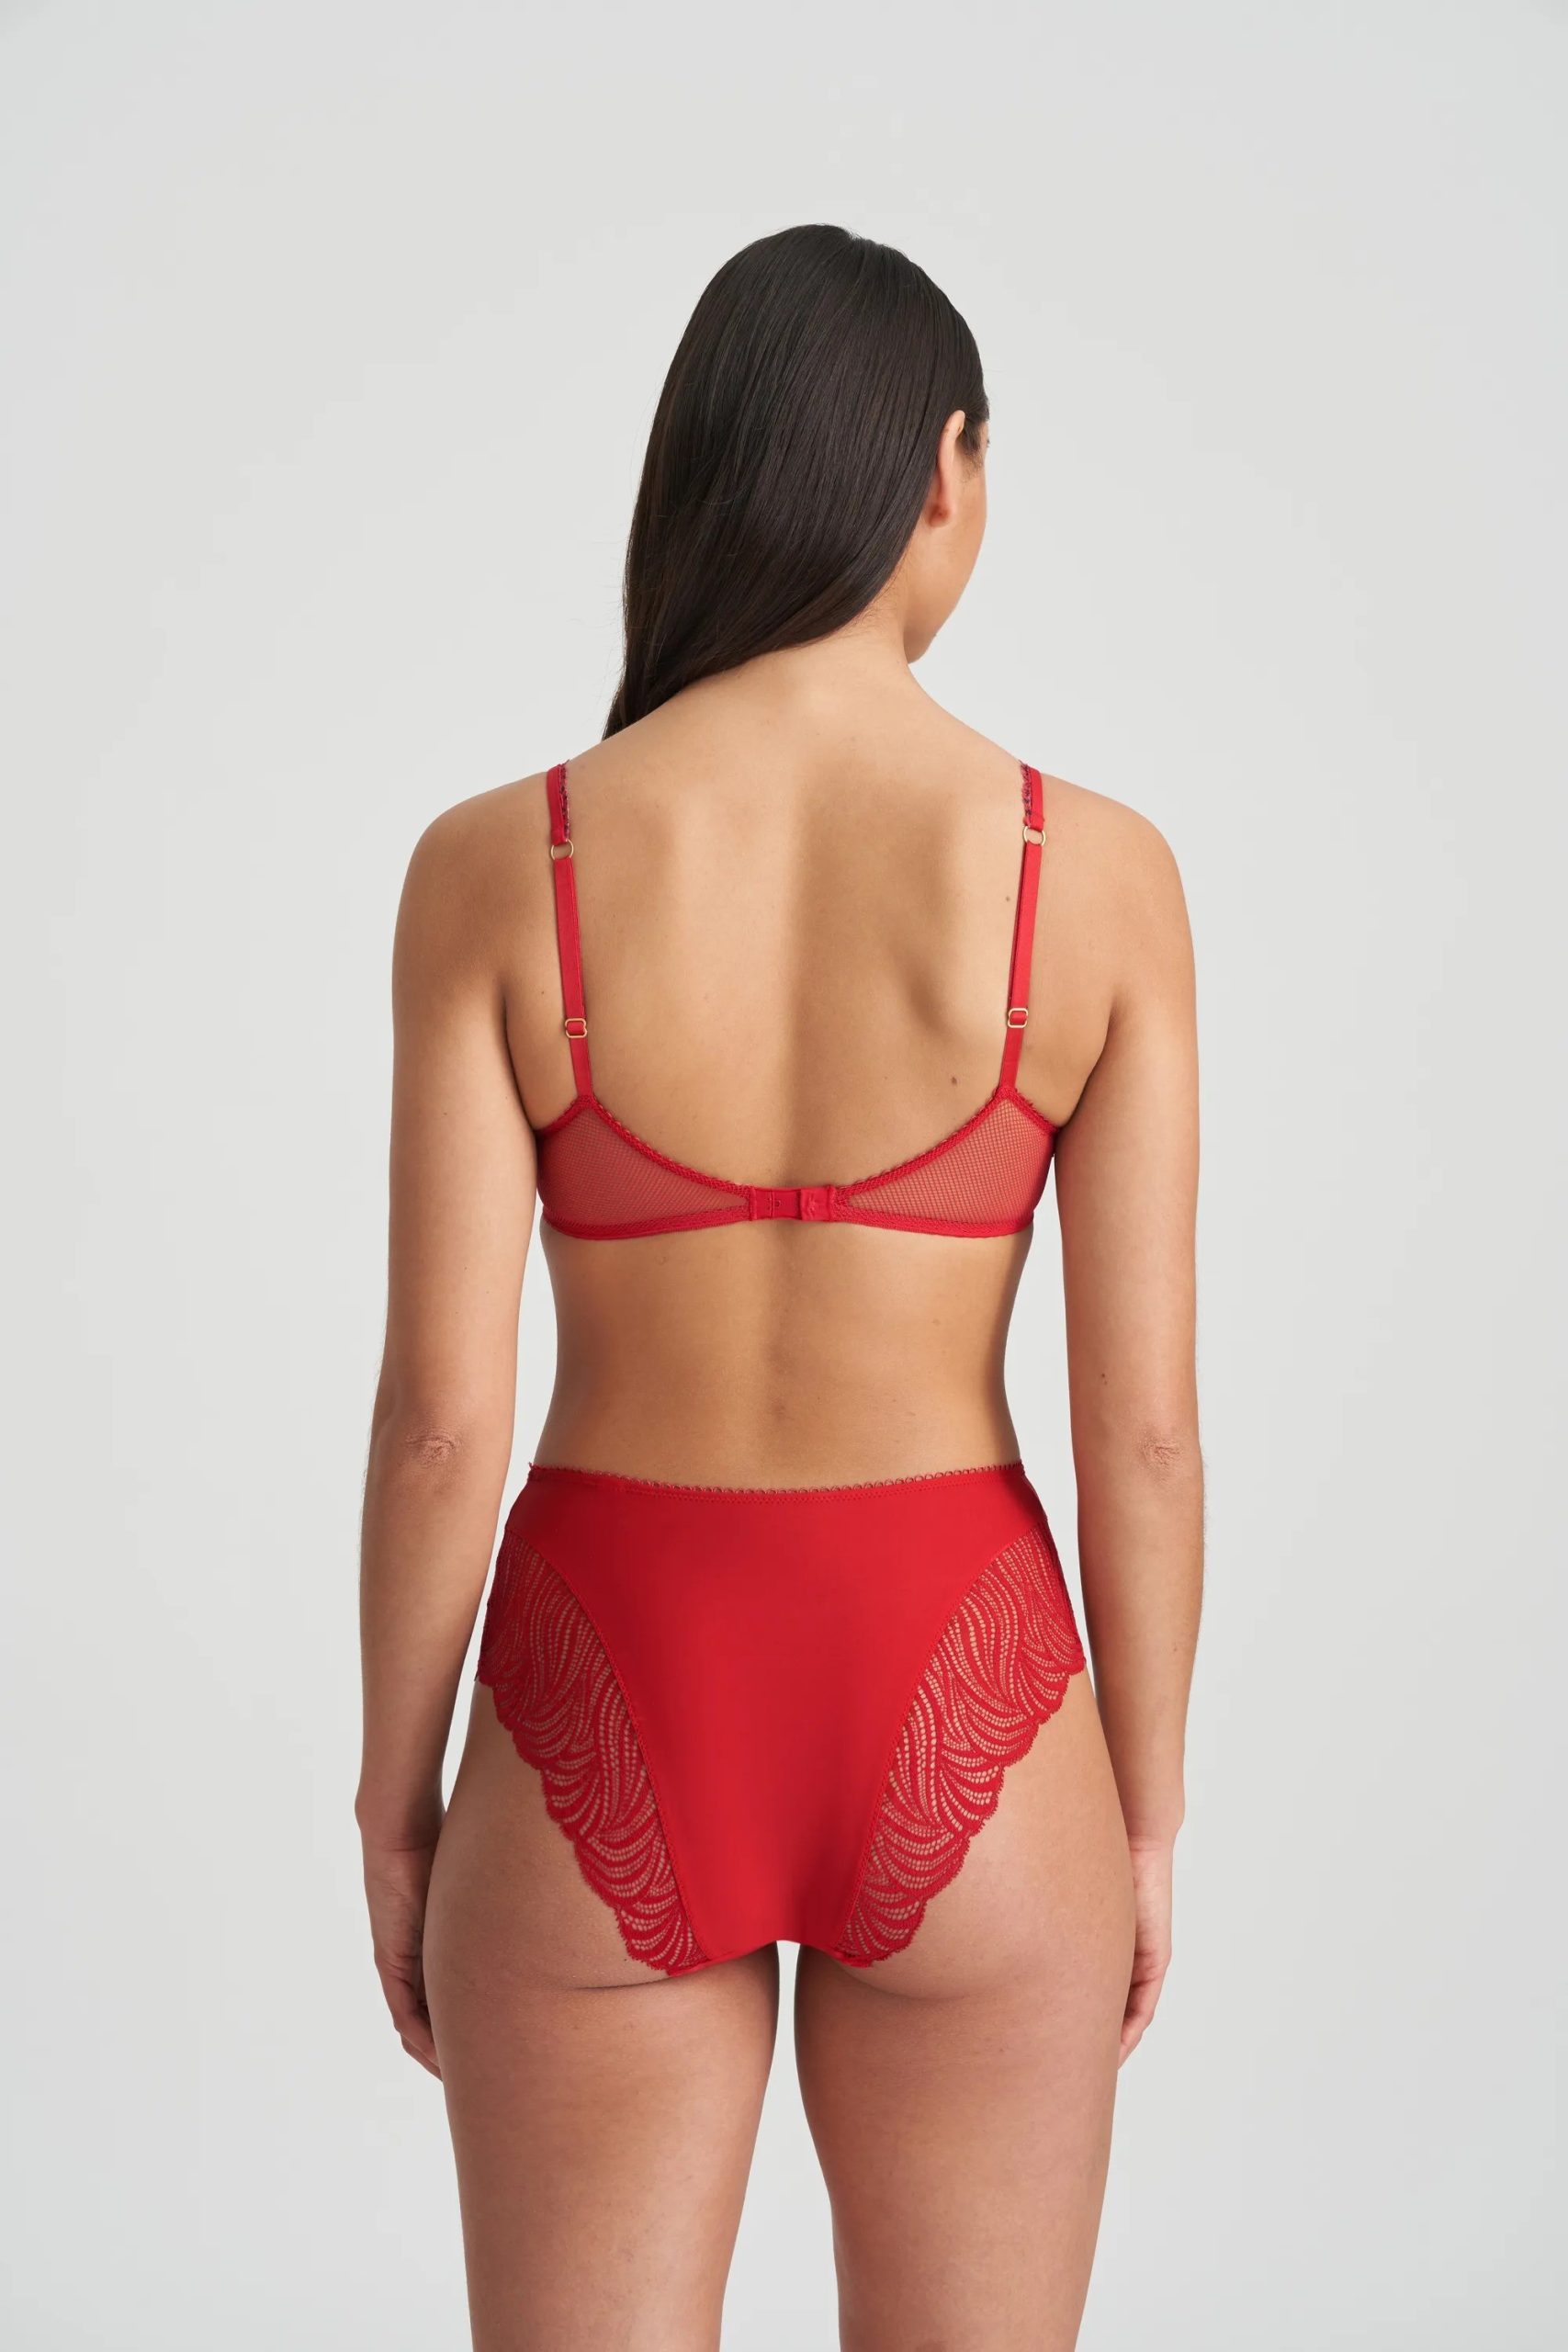 Sexy Solid Color Maaree Solidarity Bra For Women With Wrapped Fold, Chest  Strap Pad, And Camisole Vest Top Sling Underwear From Yujiliu, $15.49